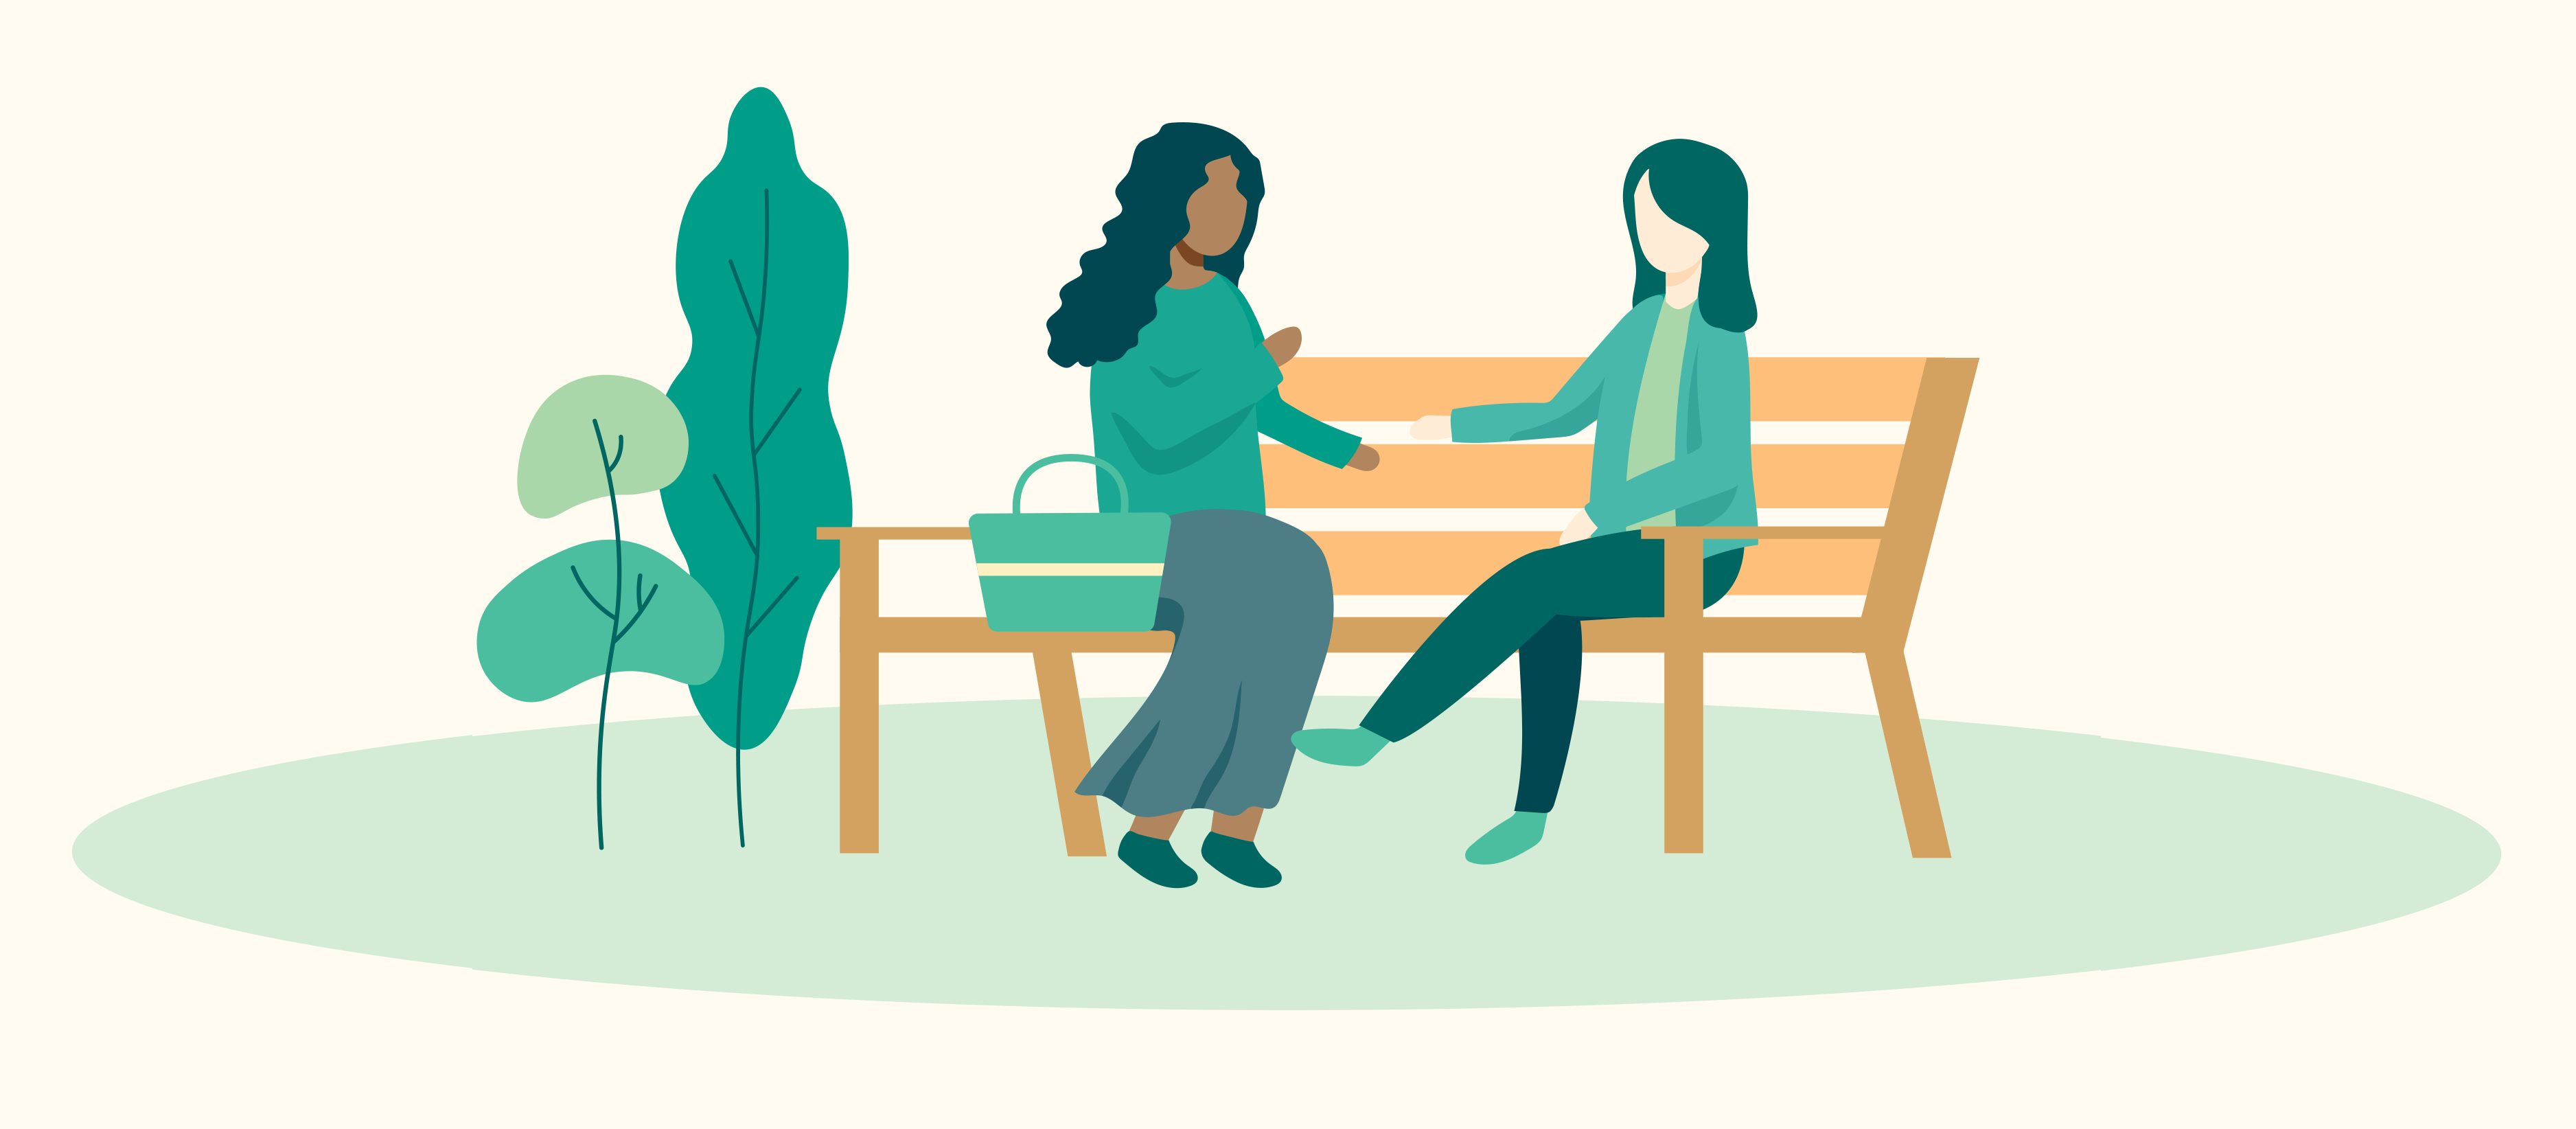 Illustration of people on bench talking to each other